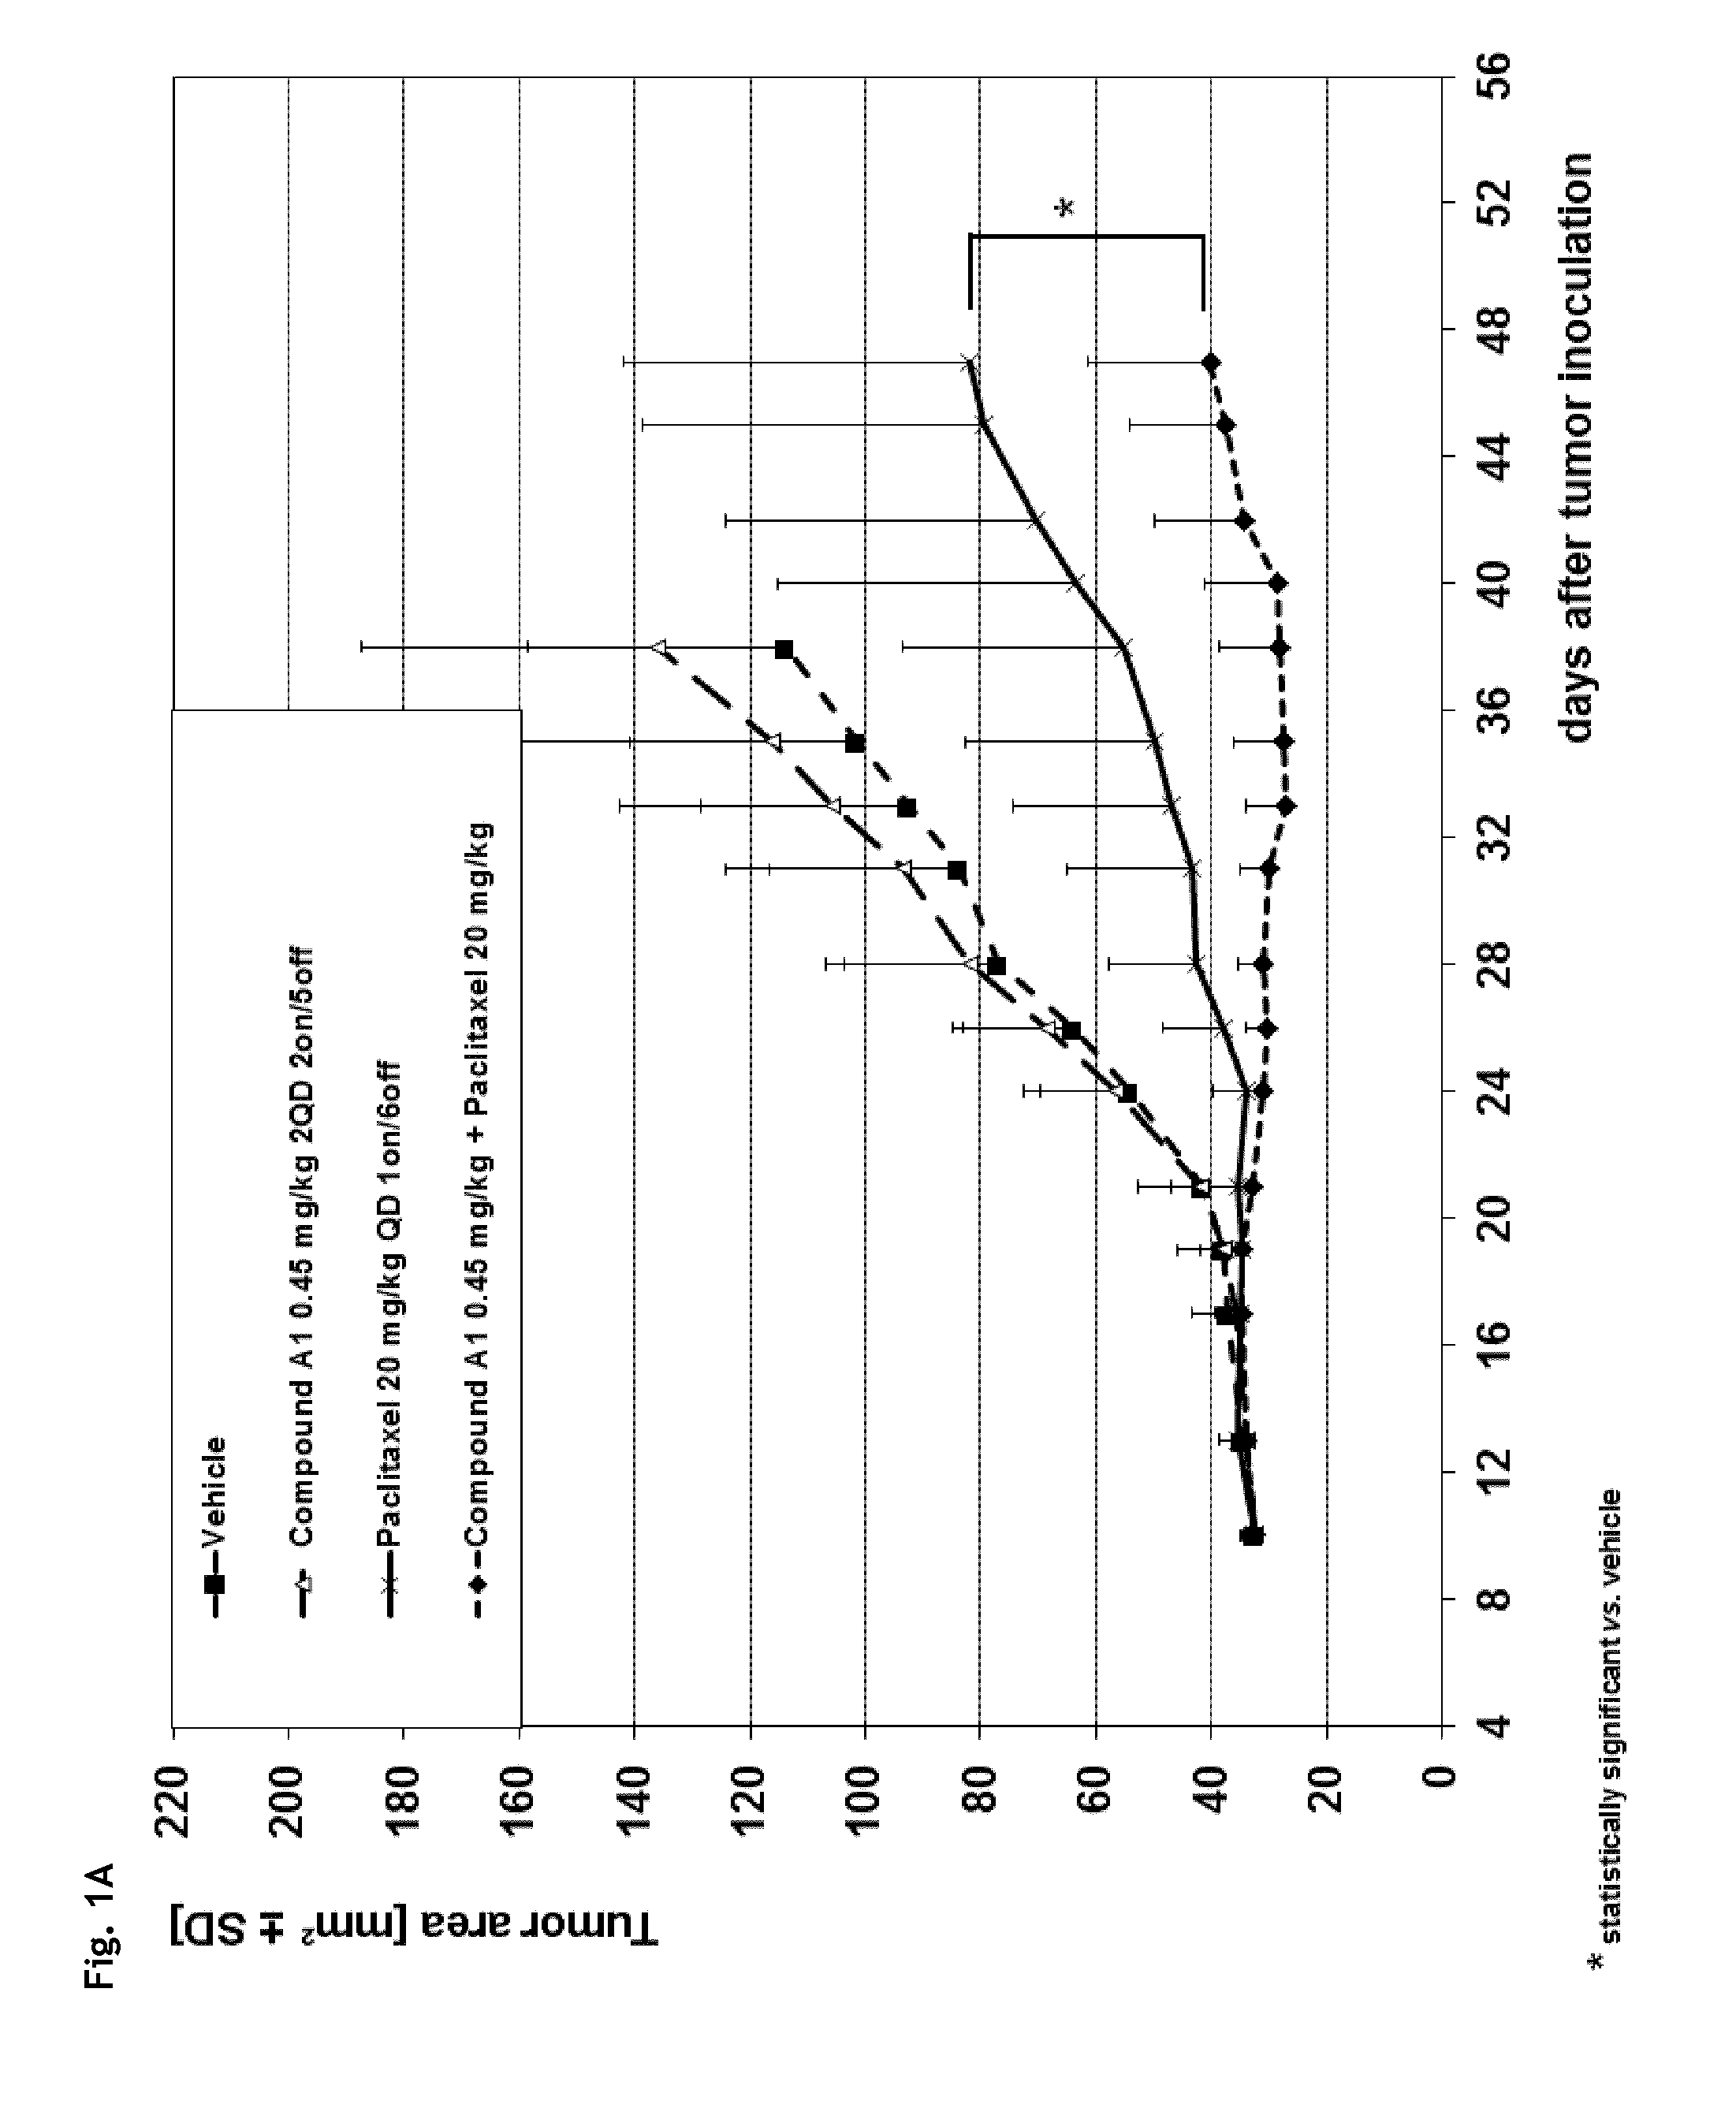 Combinations for the treatment of cancer comprising a mps-1 kinase inhibitor and a mitotic inhibitor